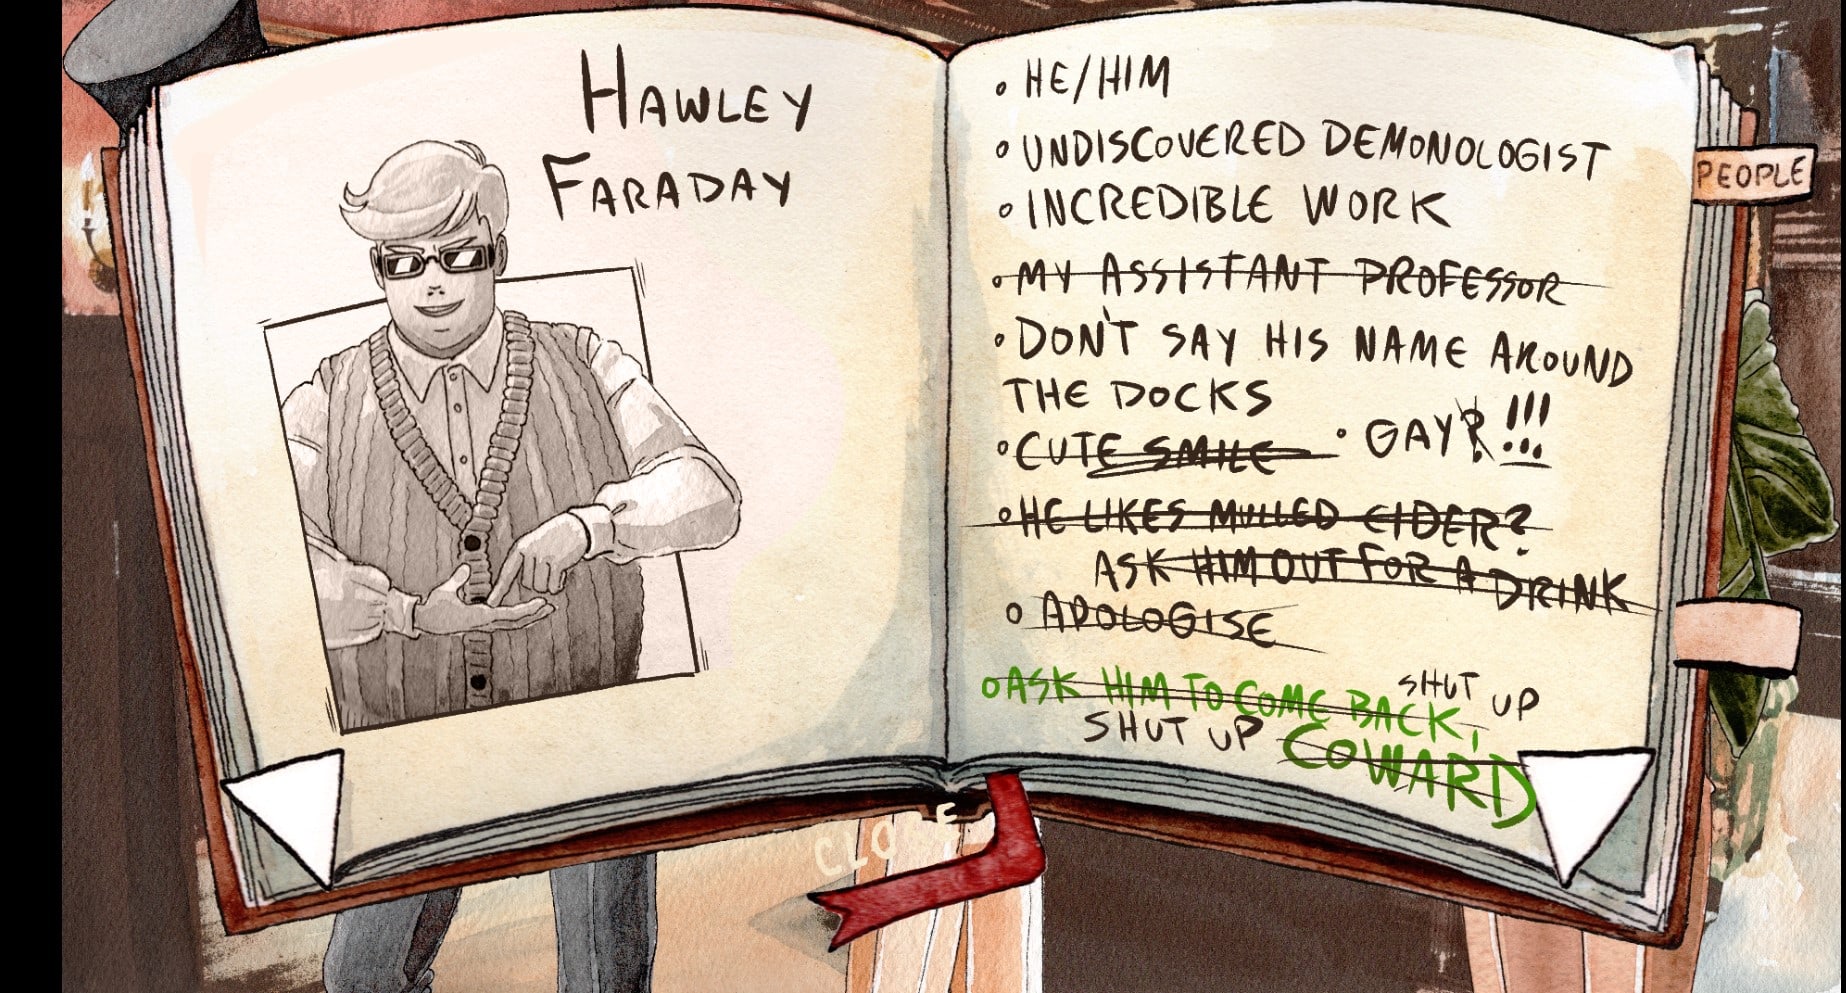 Screenshot of the in-game notebook that has notes about Hawley Faraday indicating that he's gay, a sailor, and has probably dated Harry in the past.